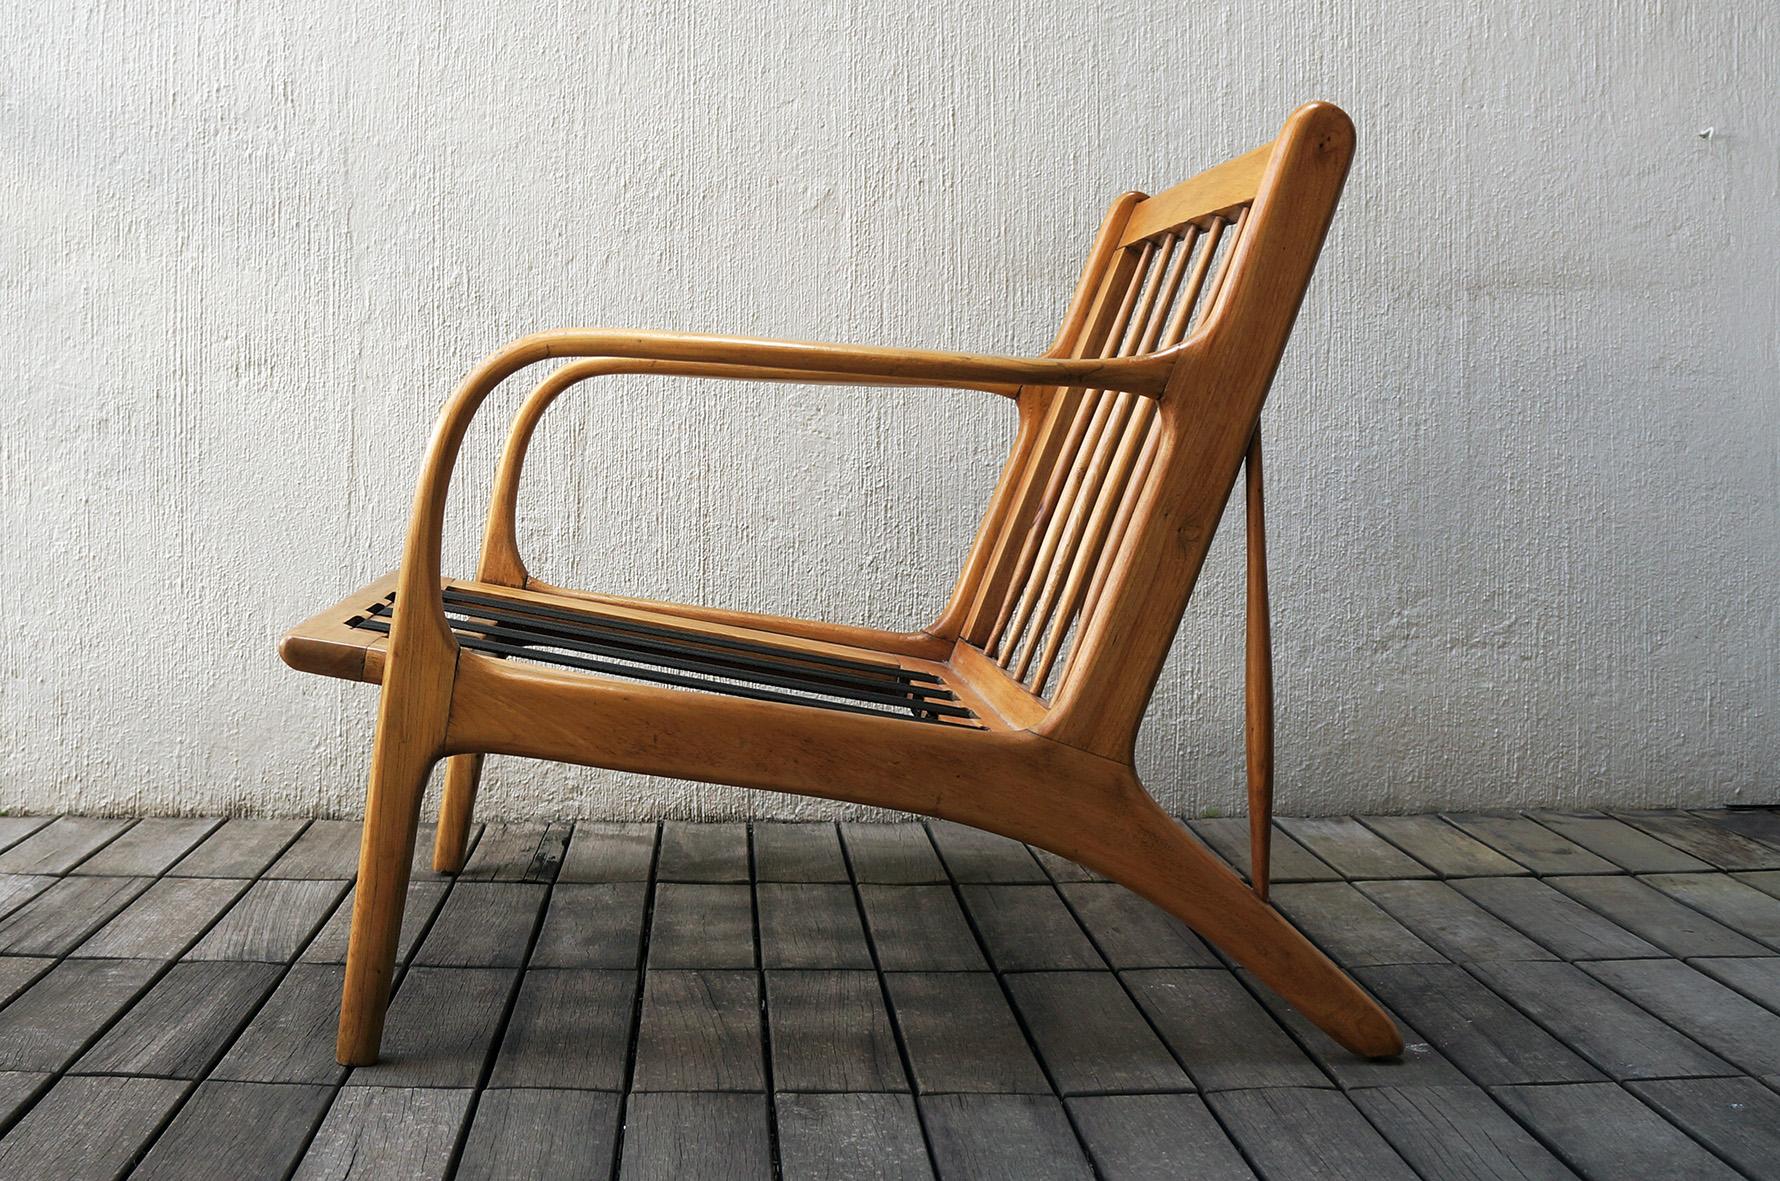 Mid-20th Century Mexican Midcentury Lounge Chair, “Malinche“, 1950s